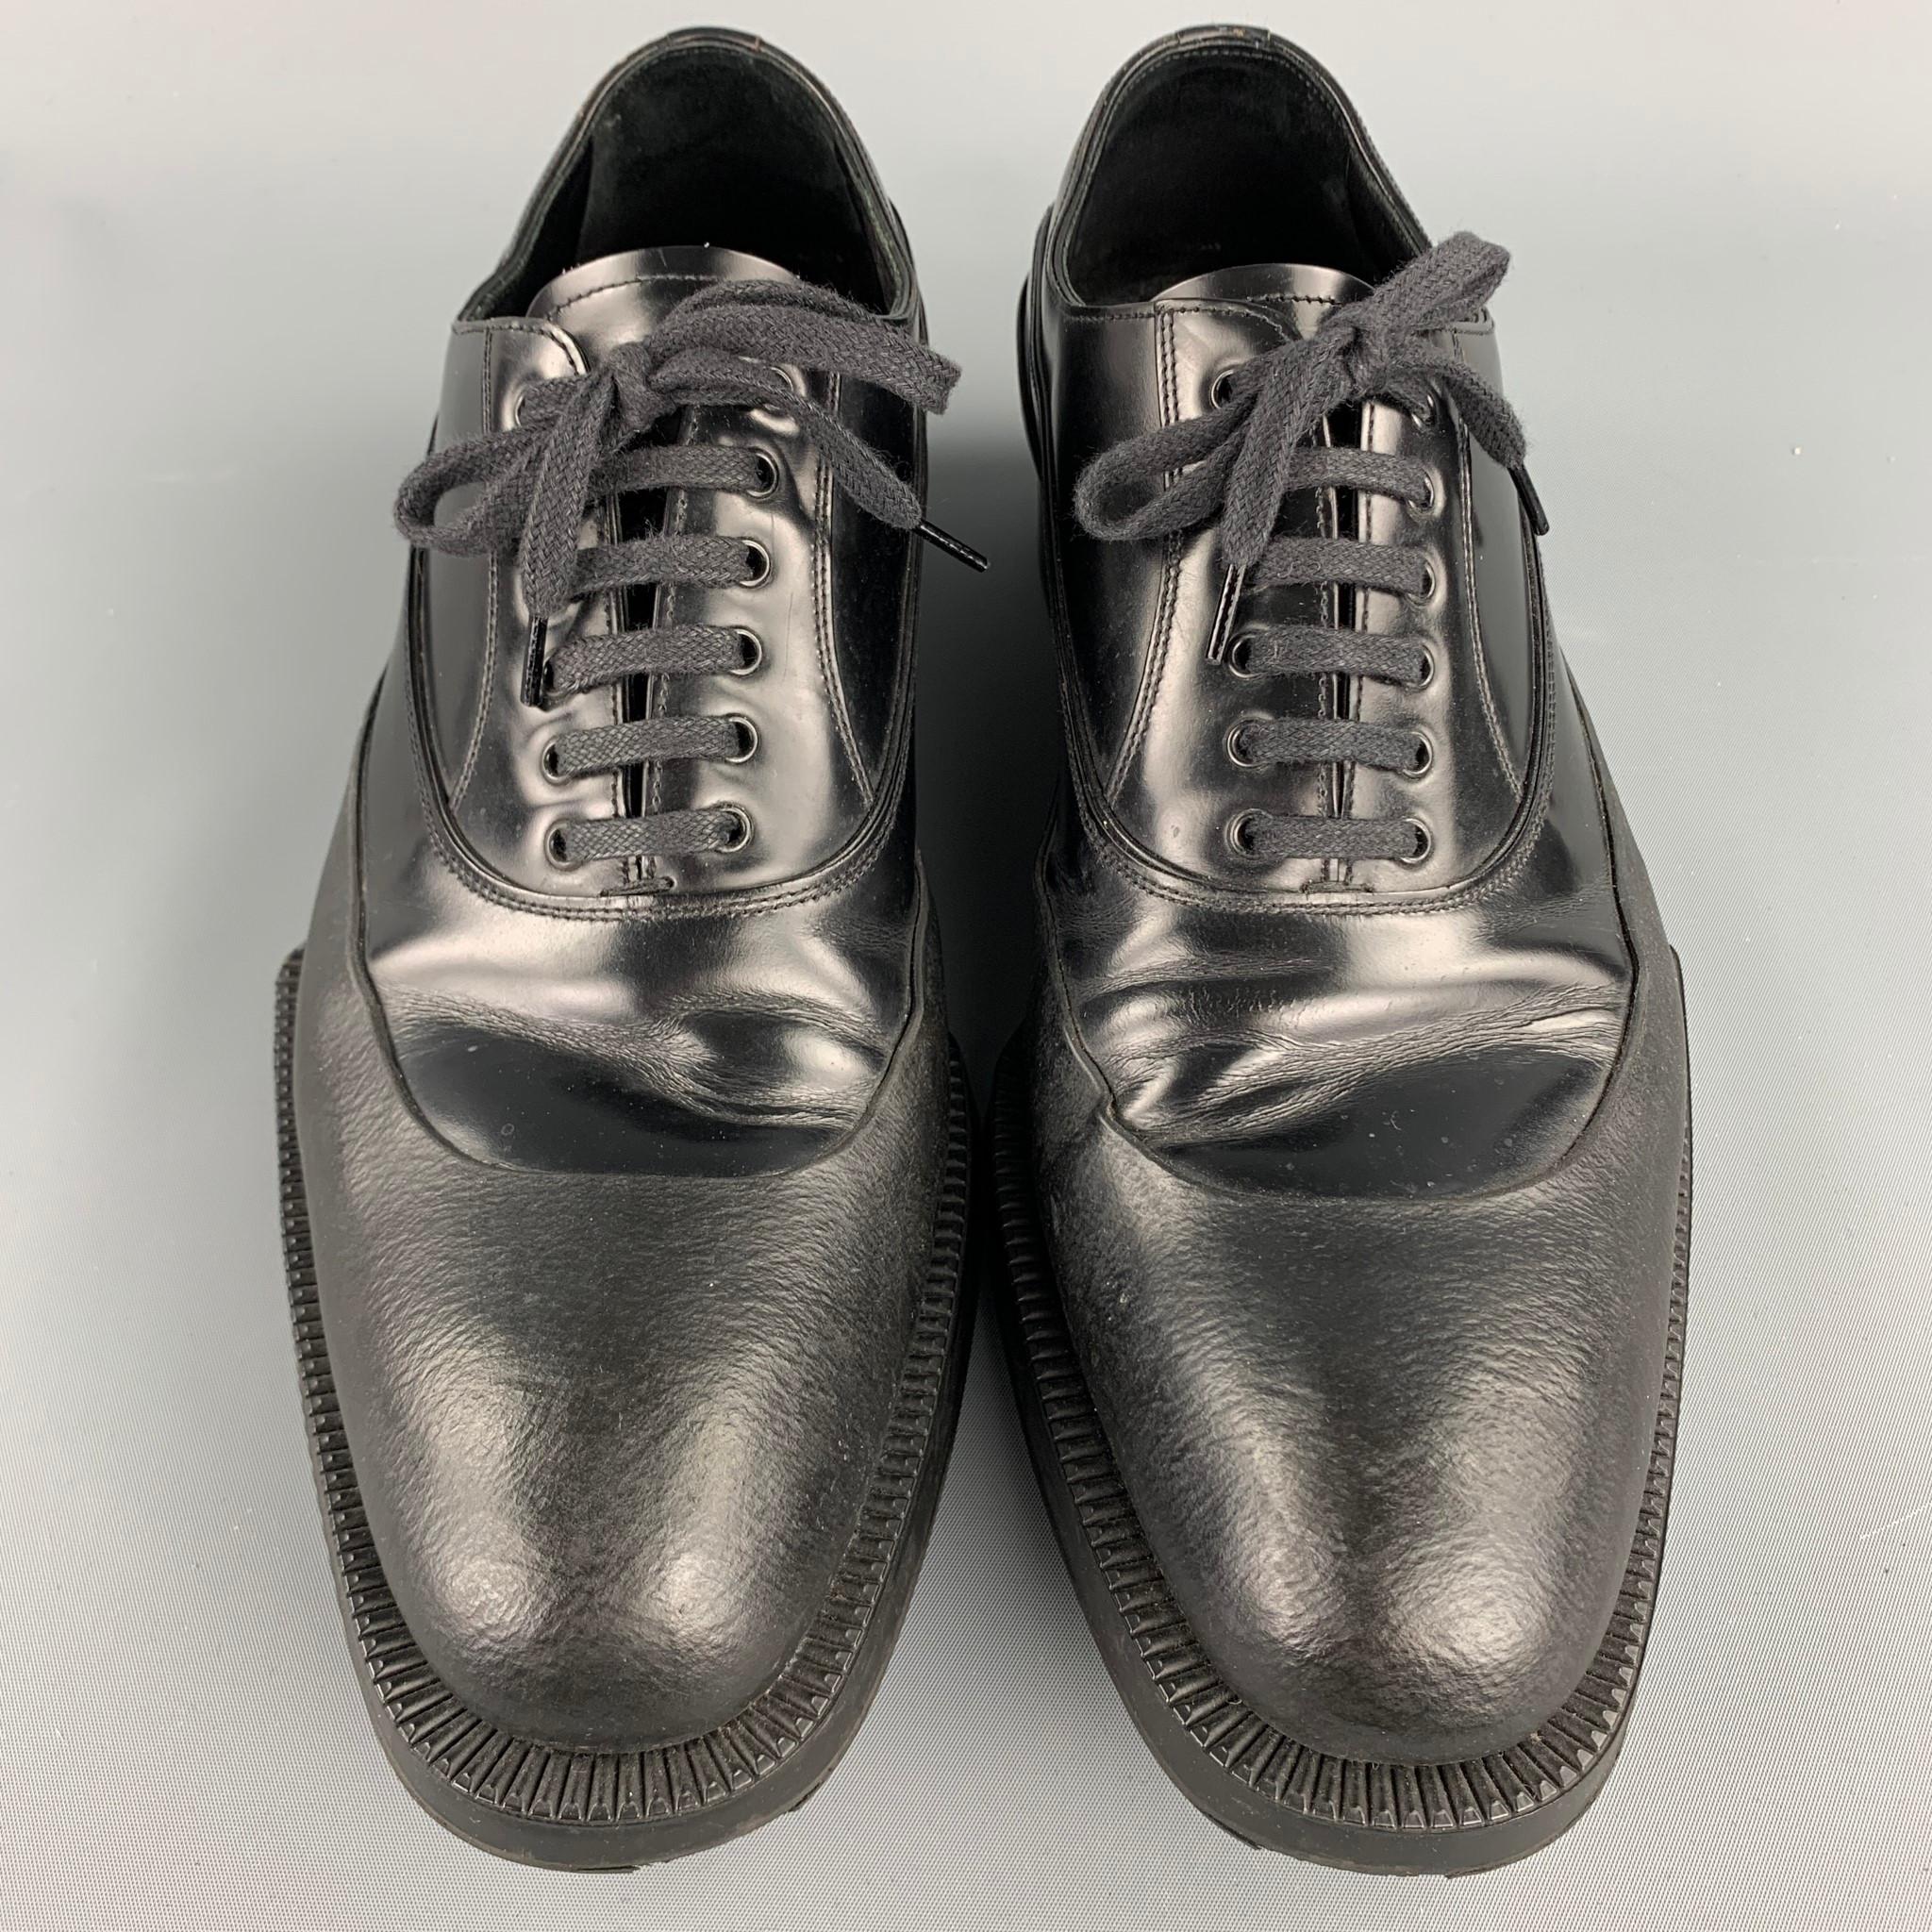 rubber dipped shoes